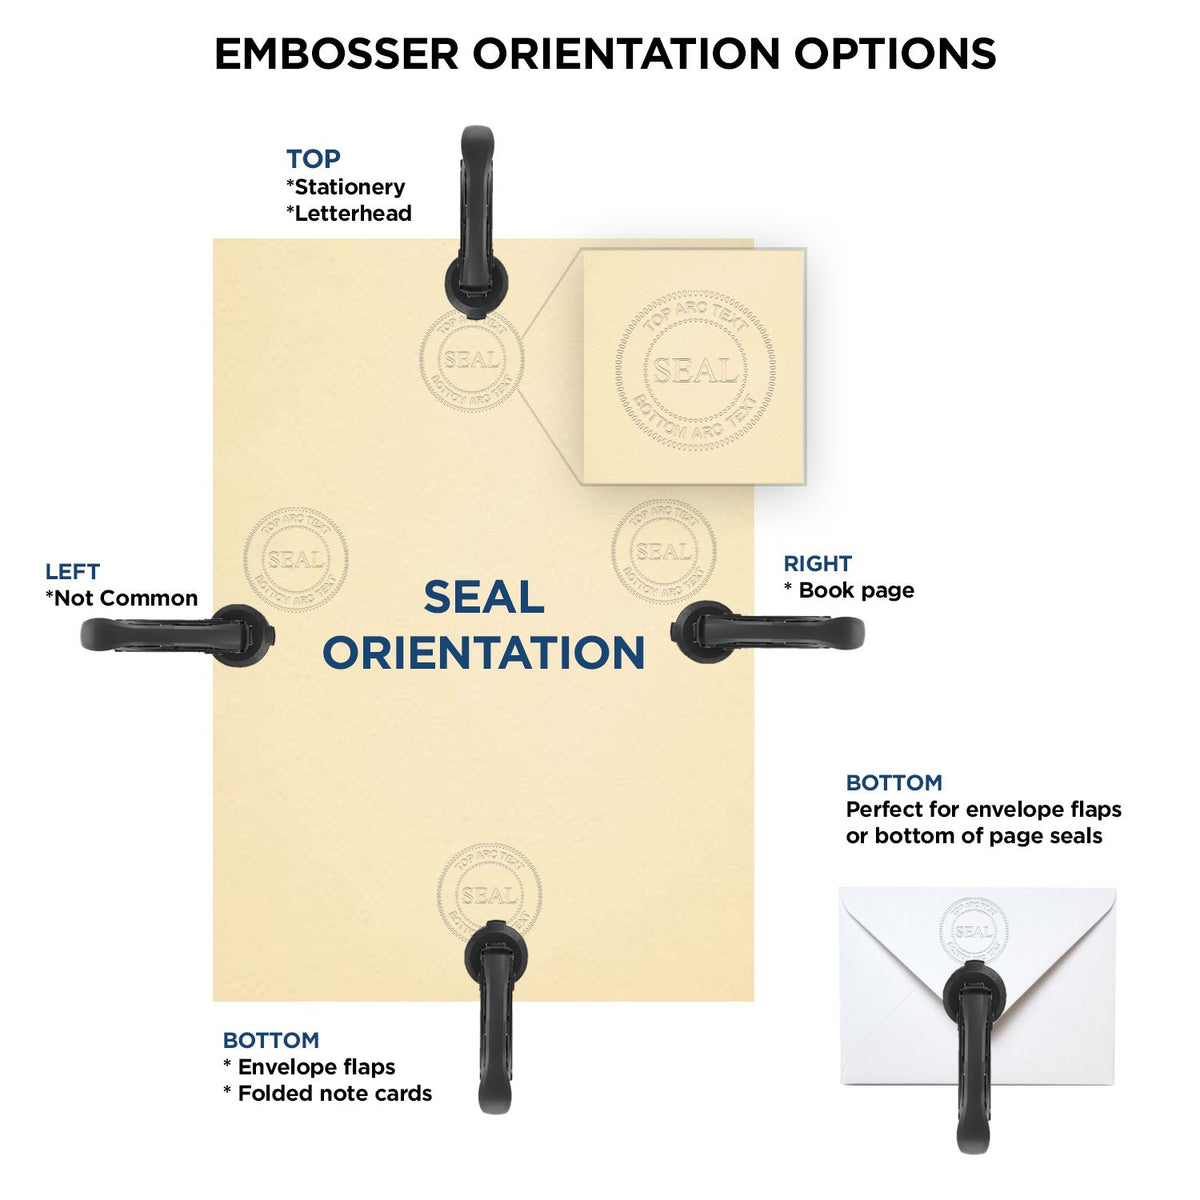 An infographic for the Heavy Duty Cast Iron Missouri Architect Embosser showing embosser orientation, this is showing examples of a top, bottom, right and left insert.